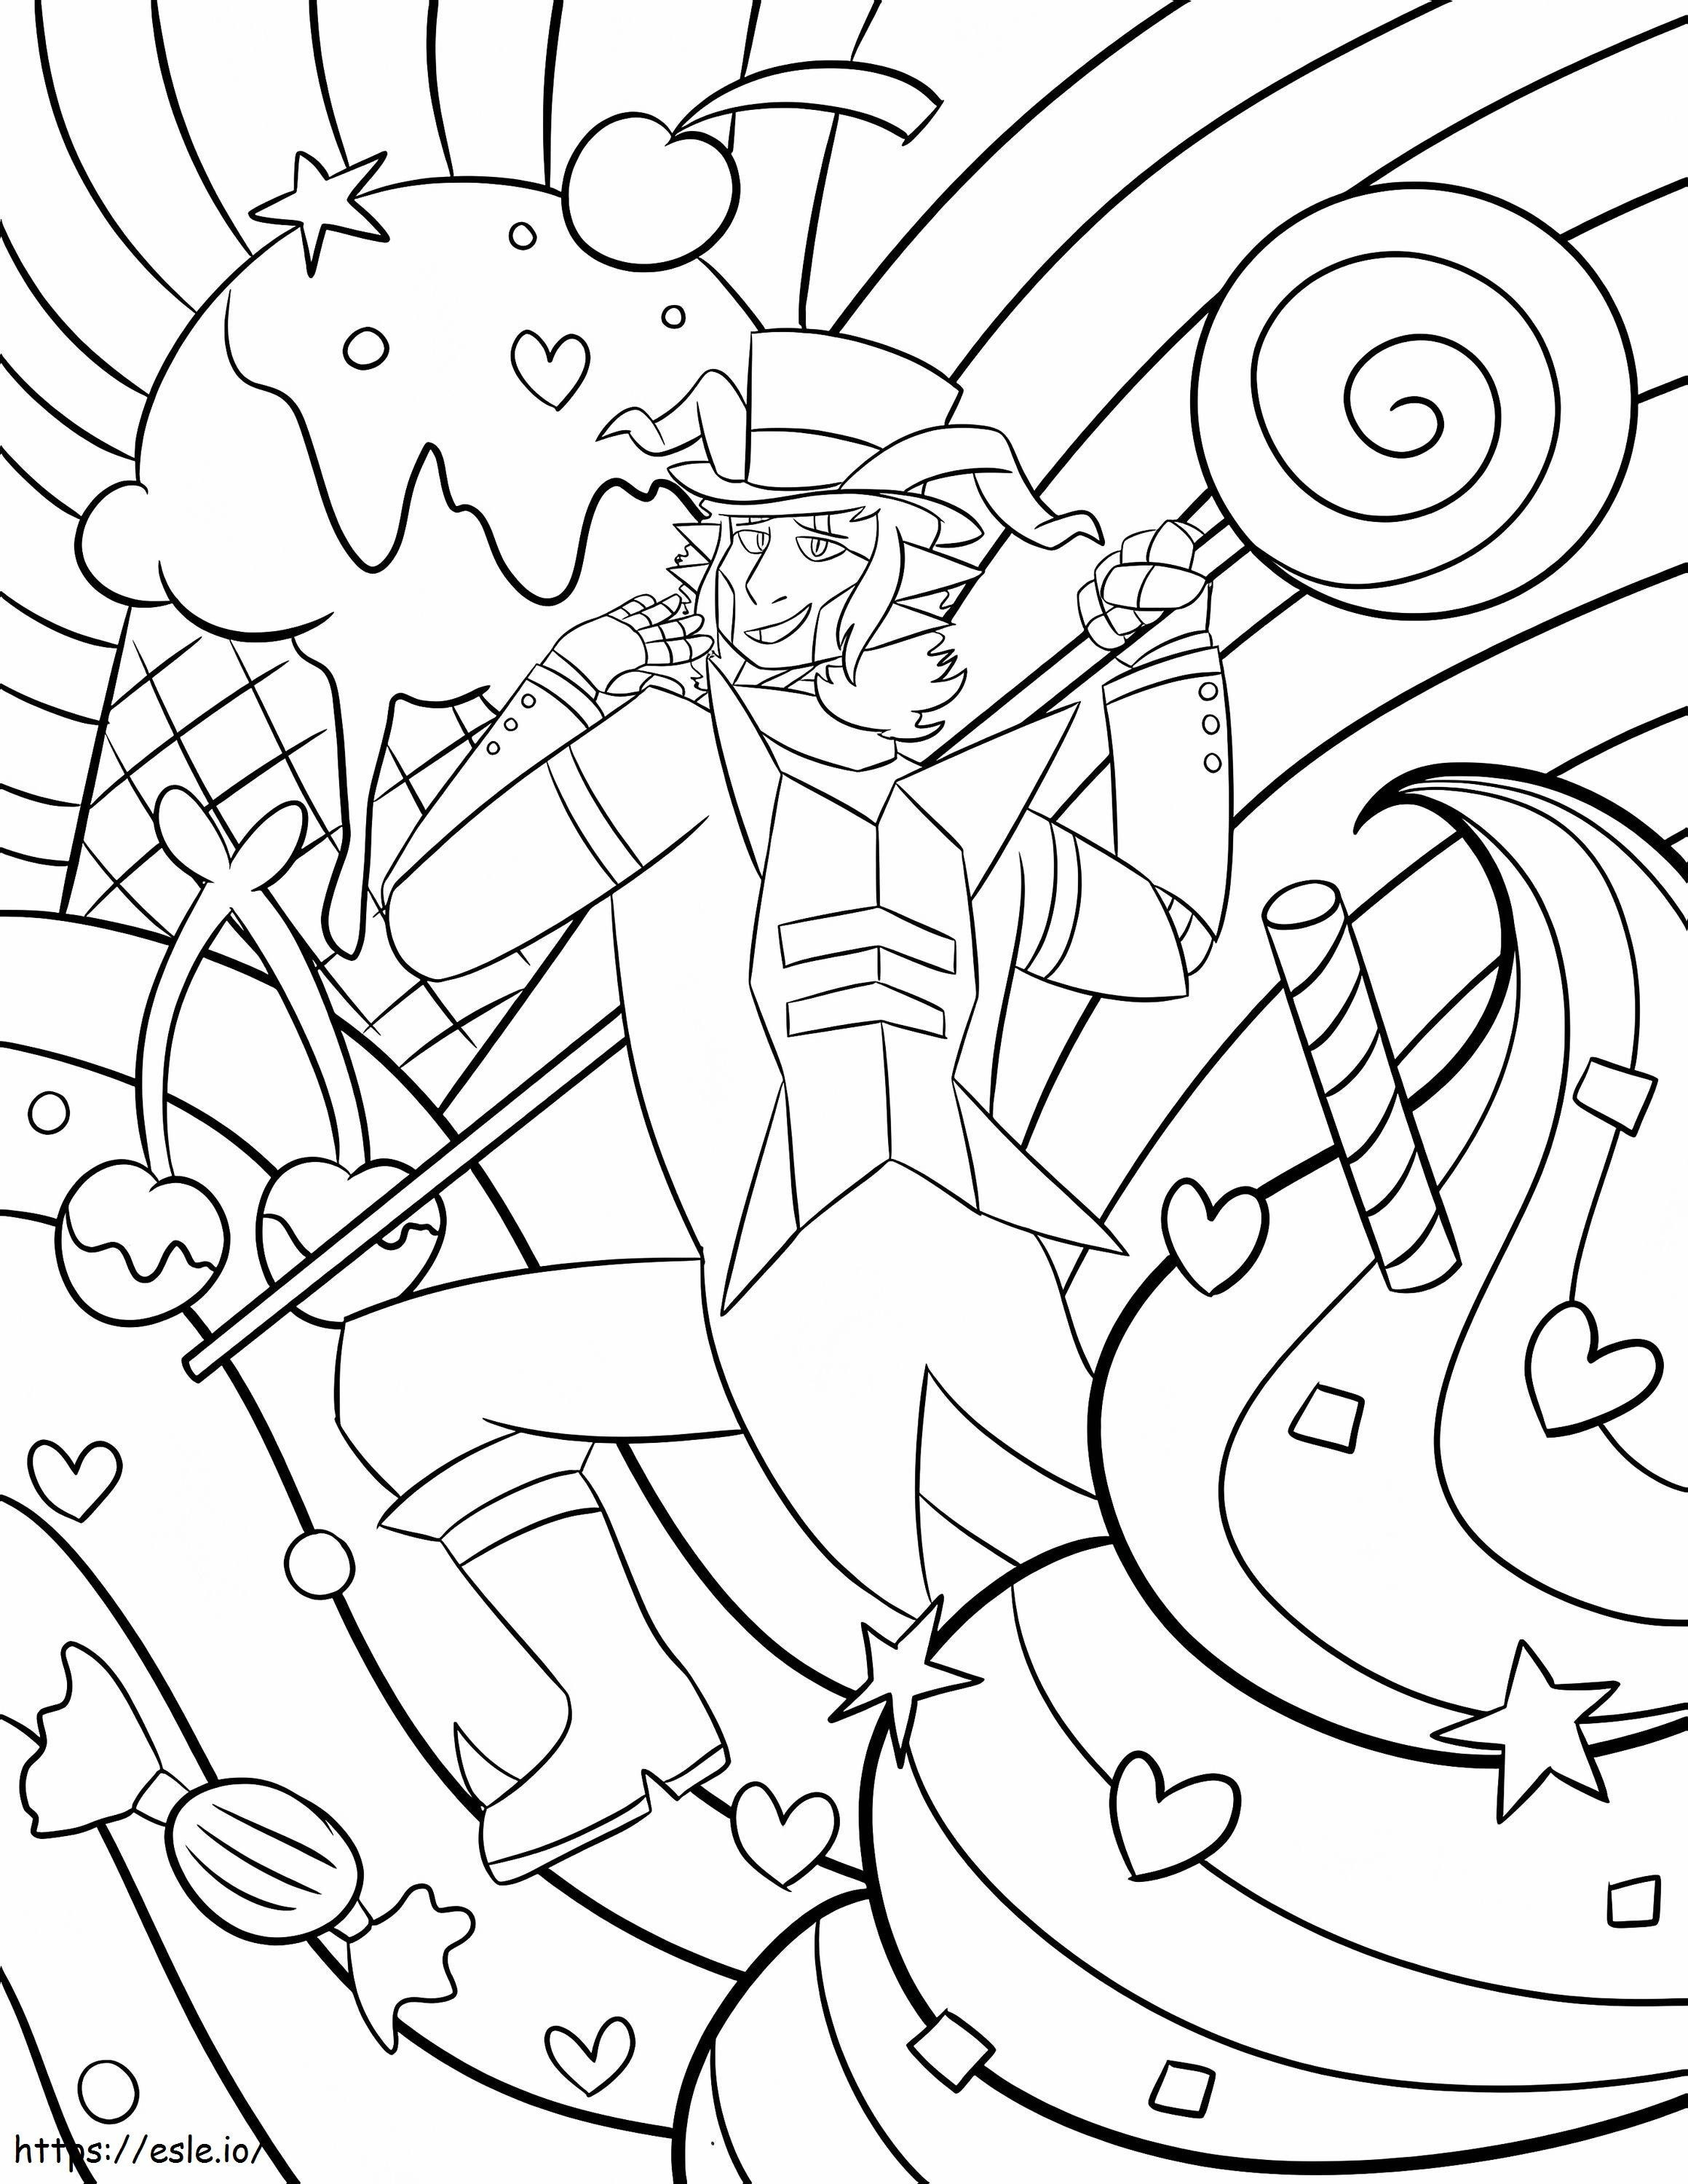 Magician In Wonderland coloring page